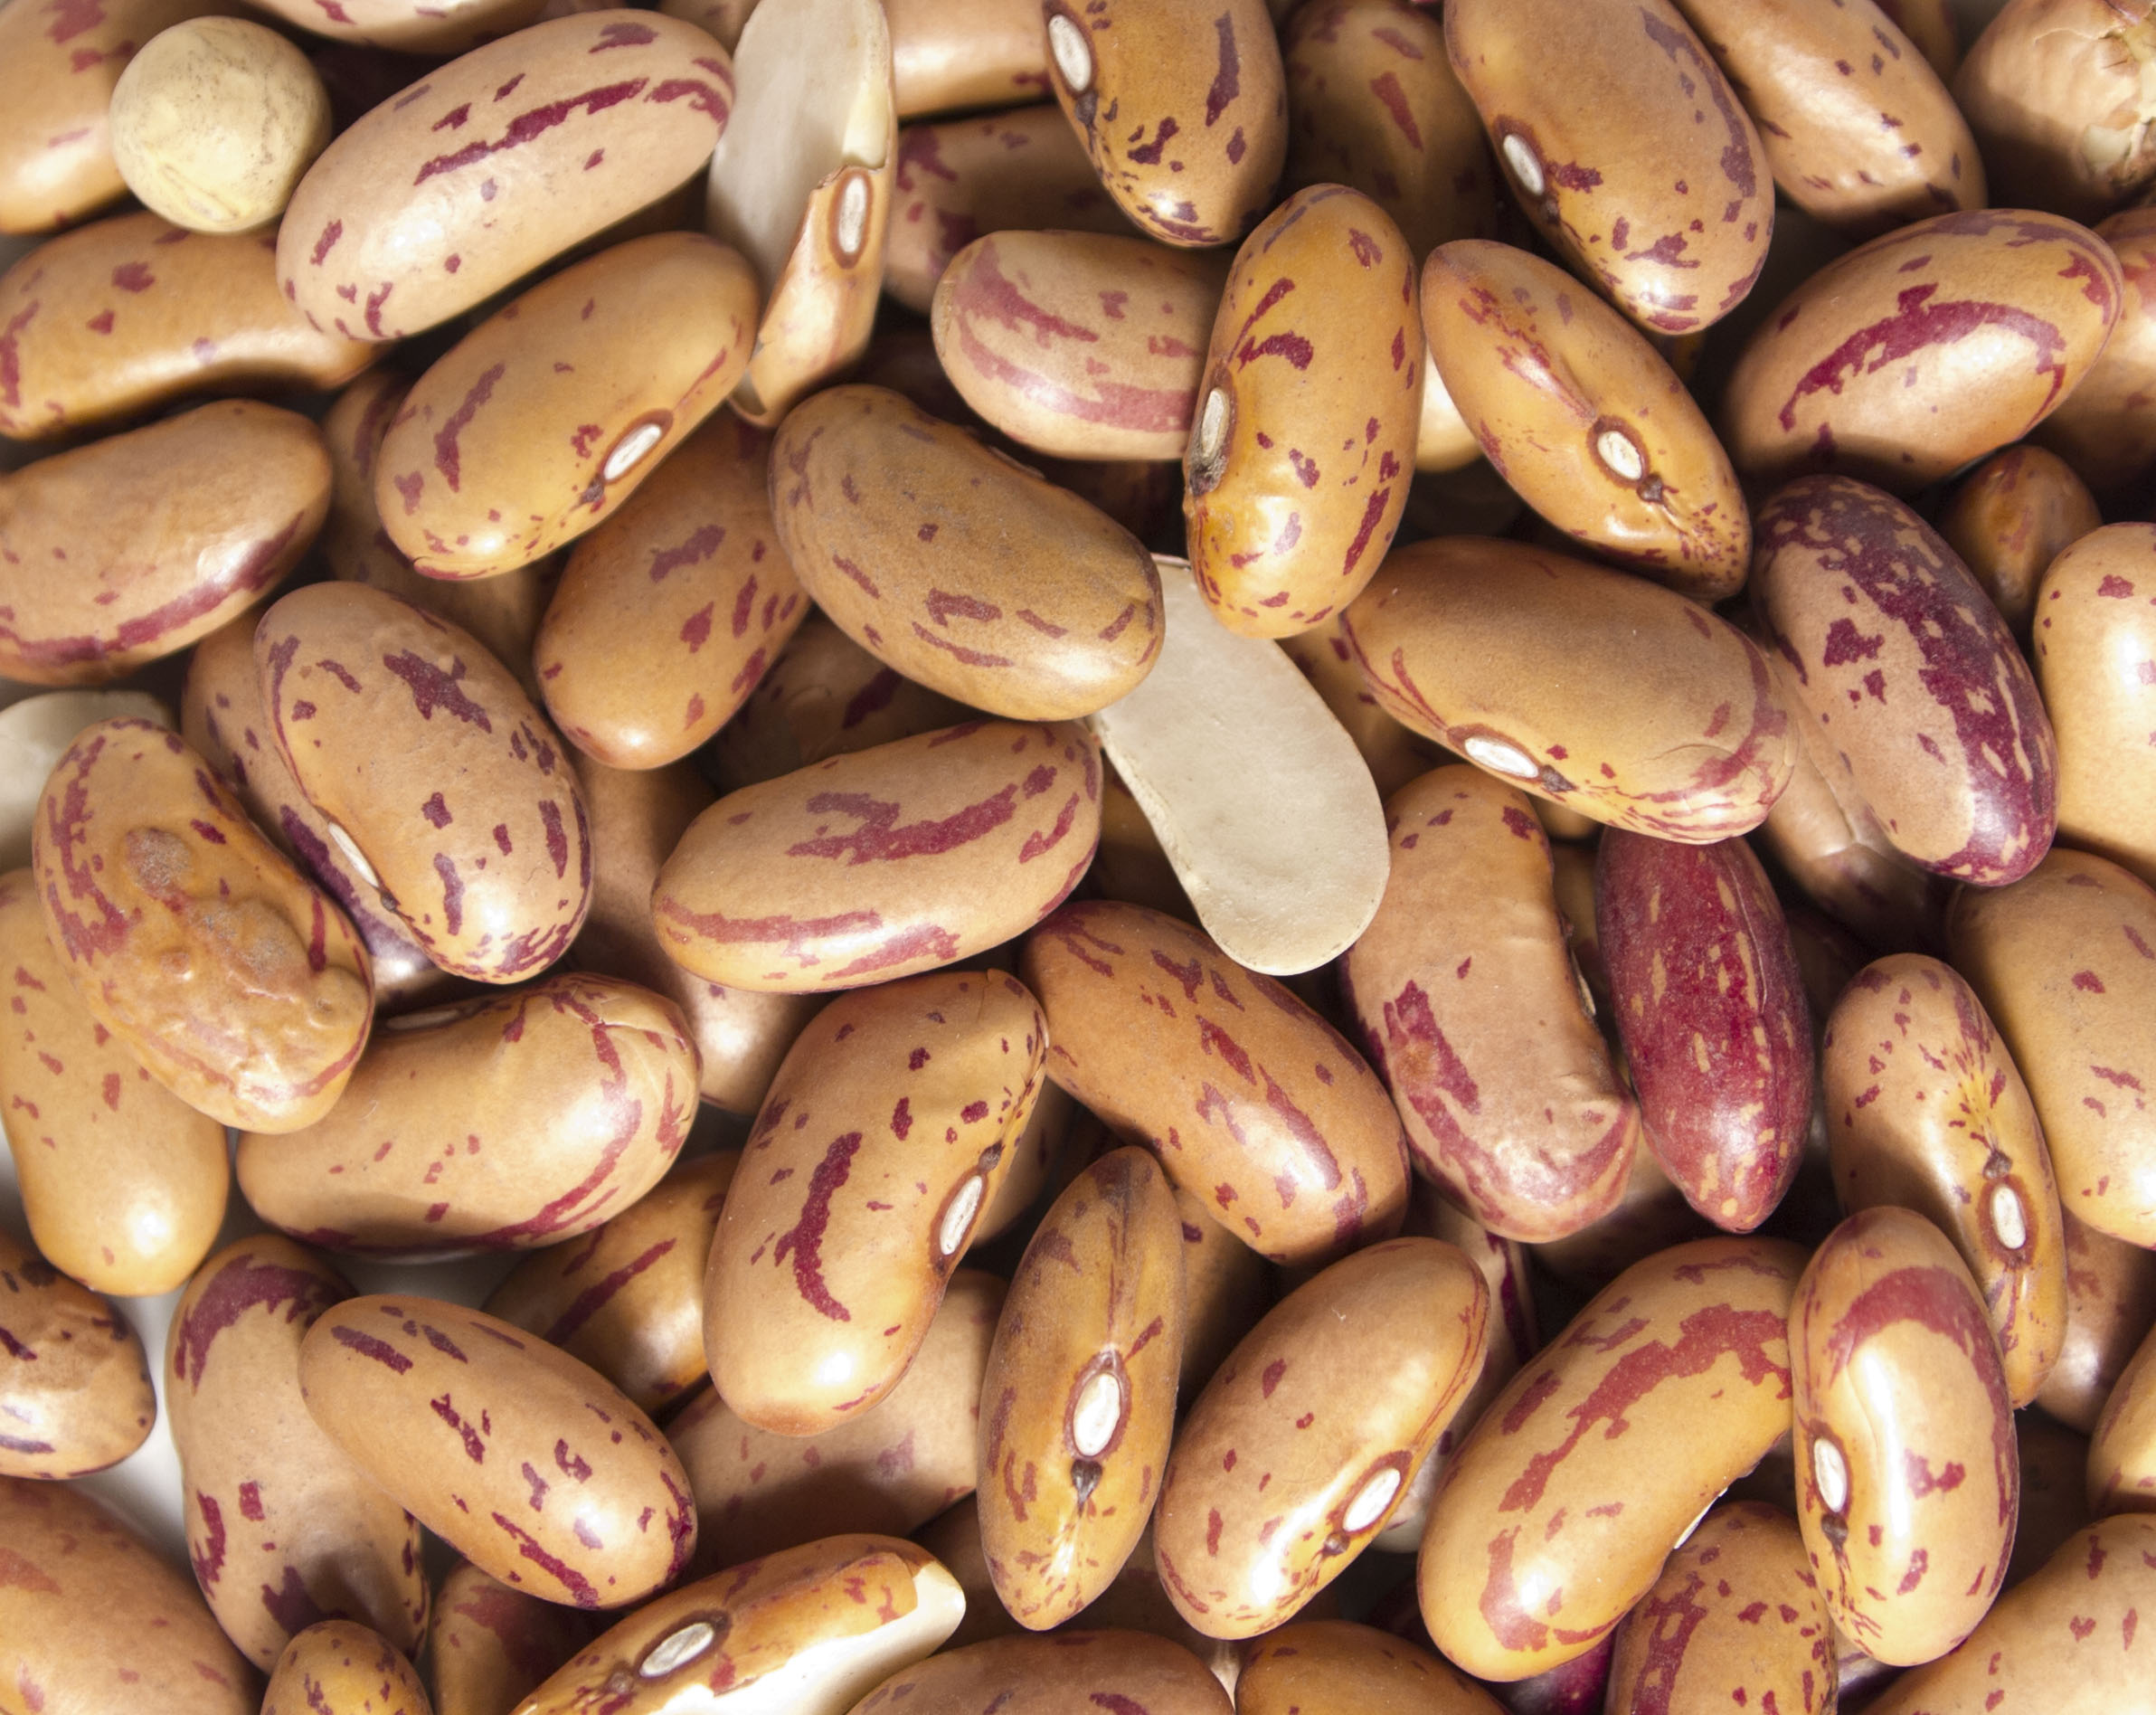 A New Bean Product Development and Scaling in East Africa